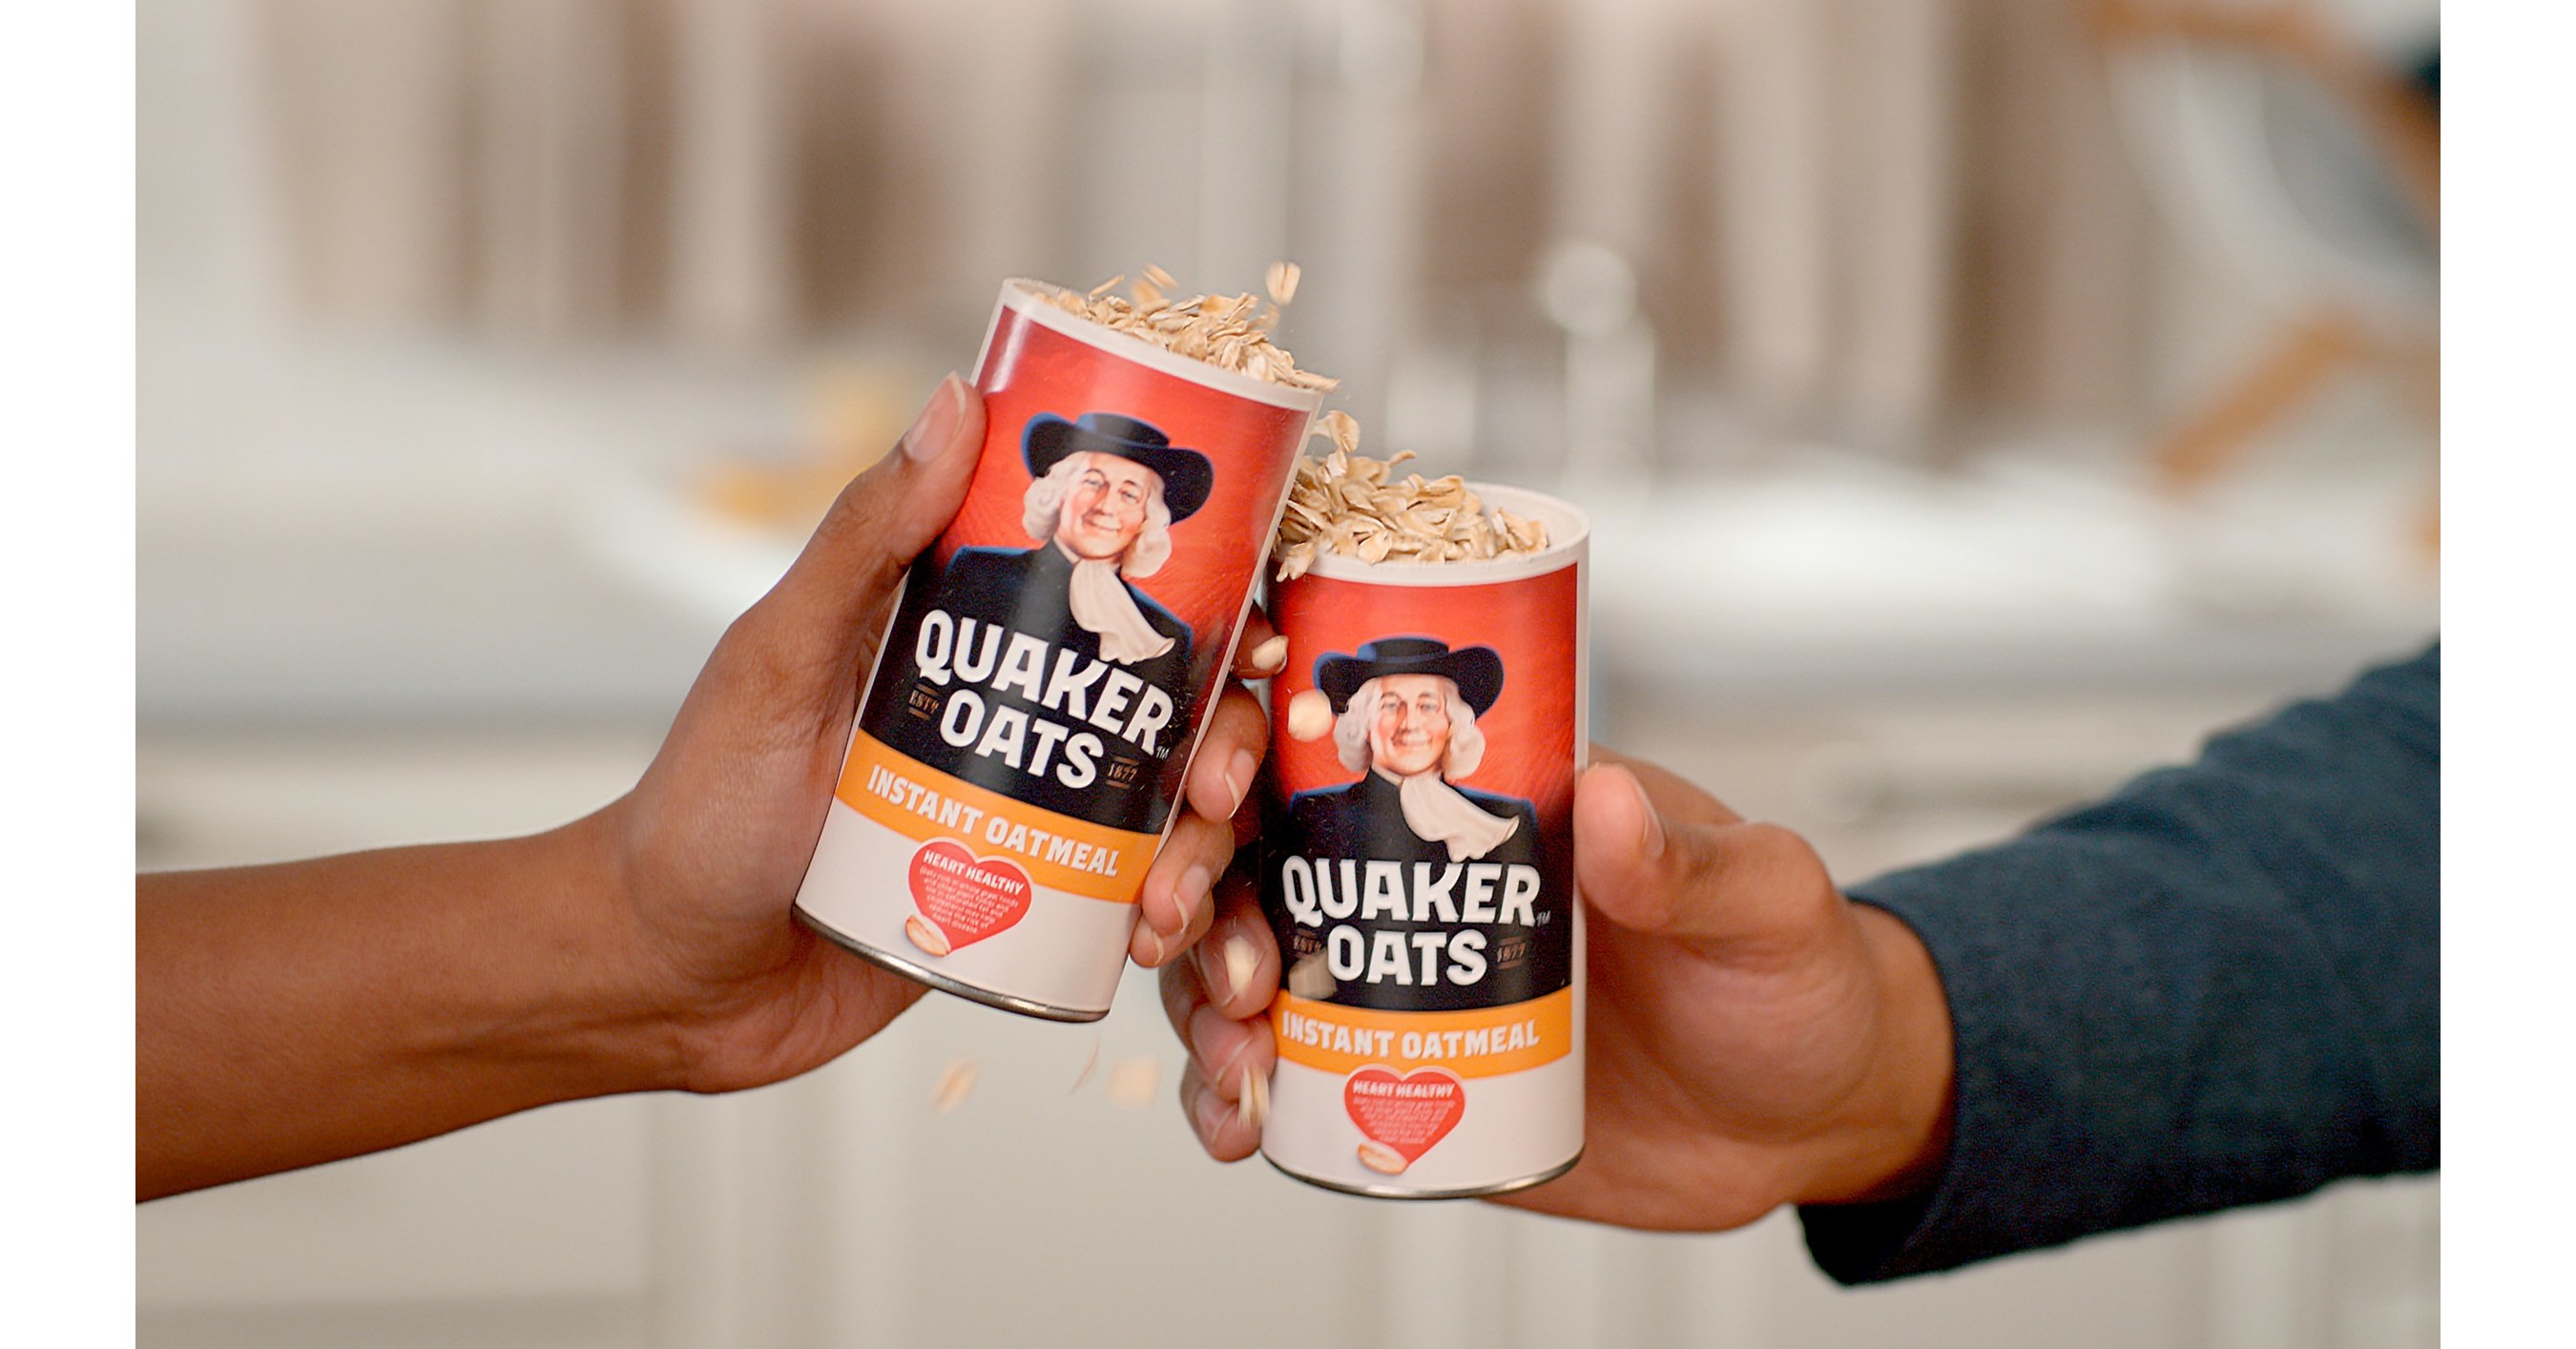 Quaker® Invites Fans to Pregrain Ahead of the Big Game with Quaker Oats  6-Pack Sweepstakes